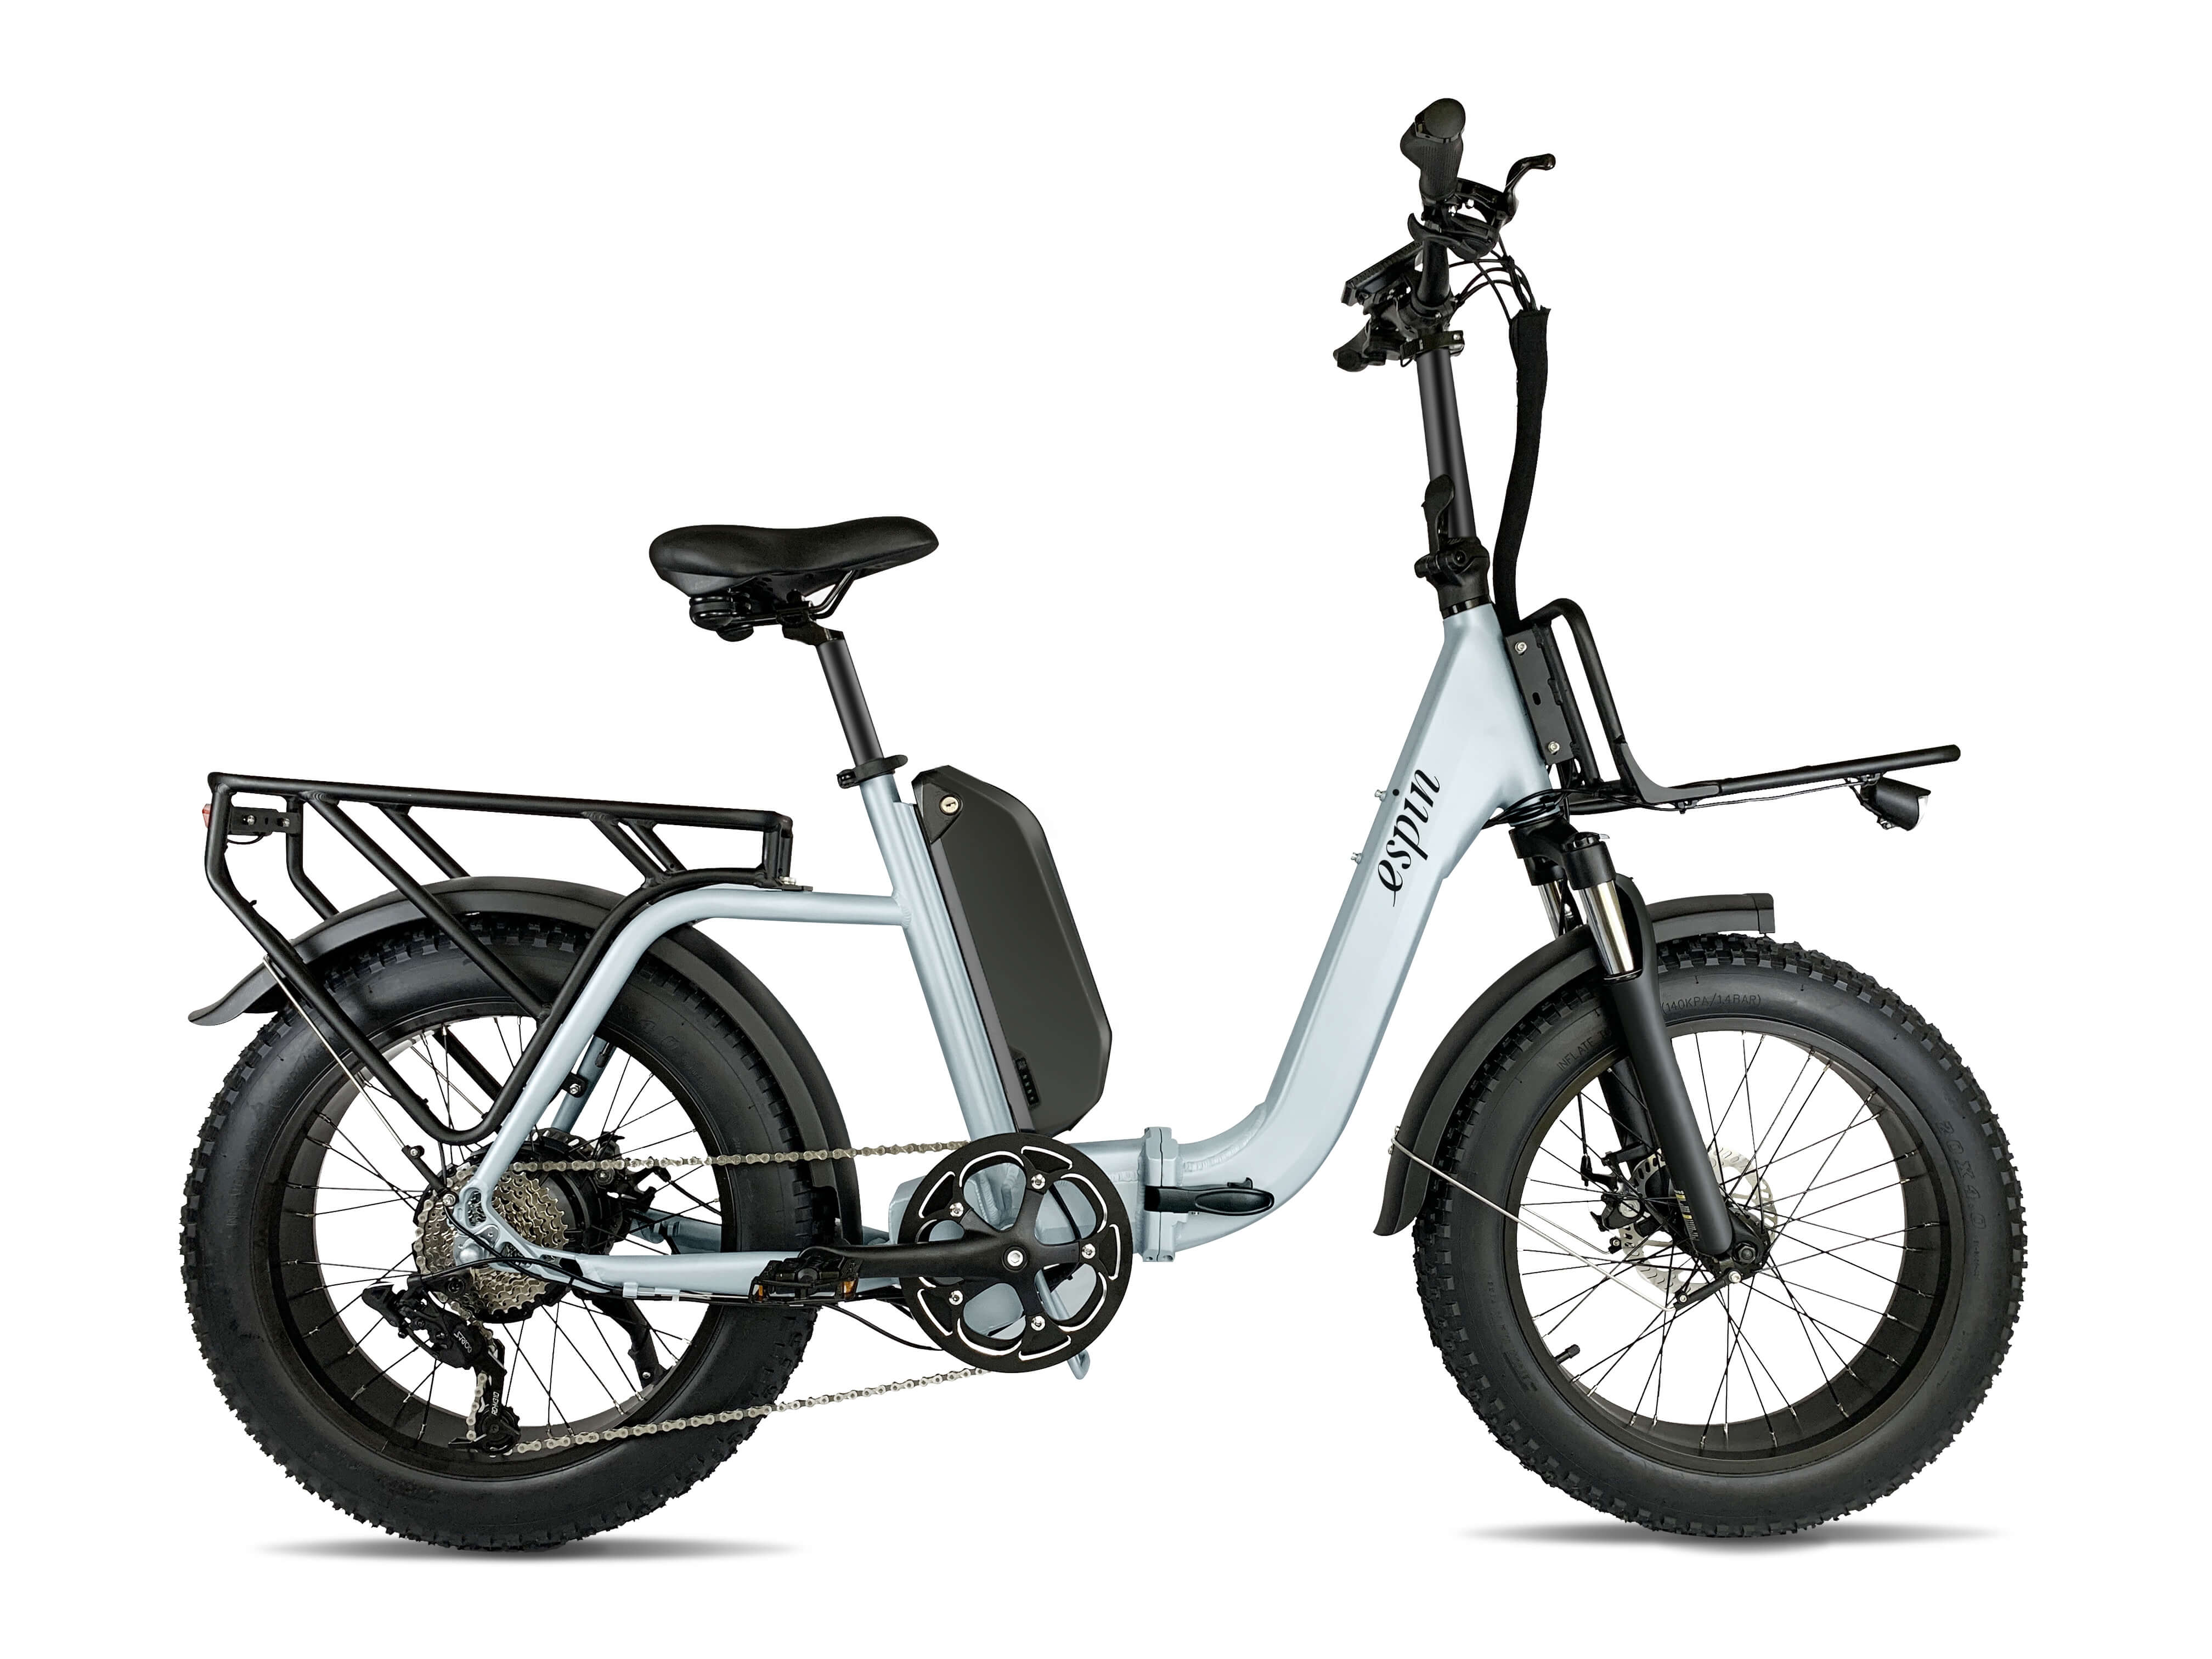 Riding and commuting by e-bike is awesome.Nesta eBike for zipping from city streets to train to work or anywhere else features both pedal assist and throttle mode.